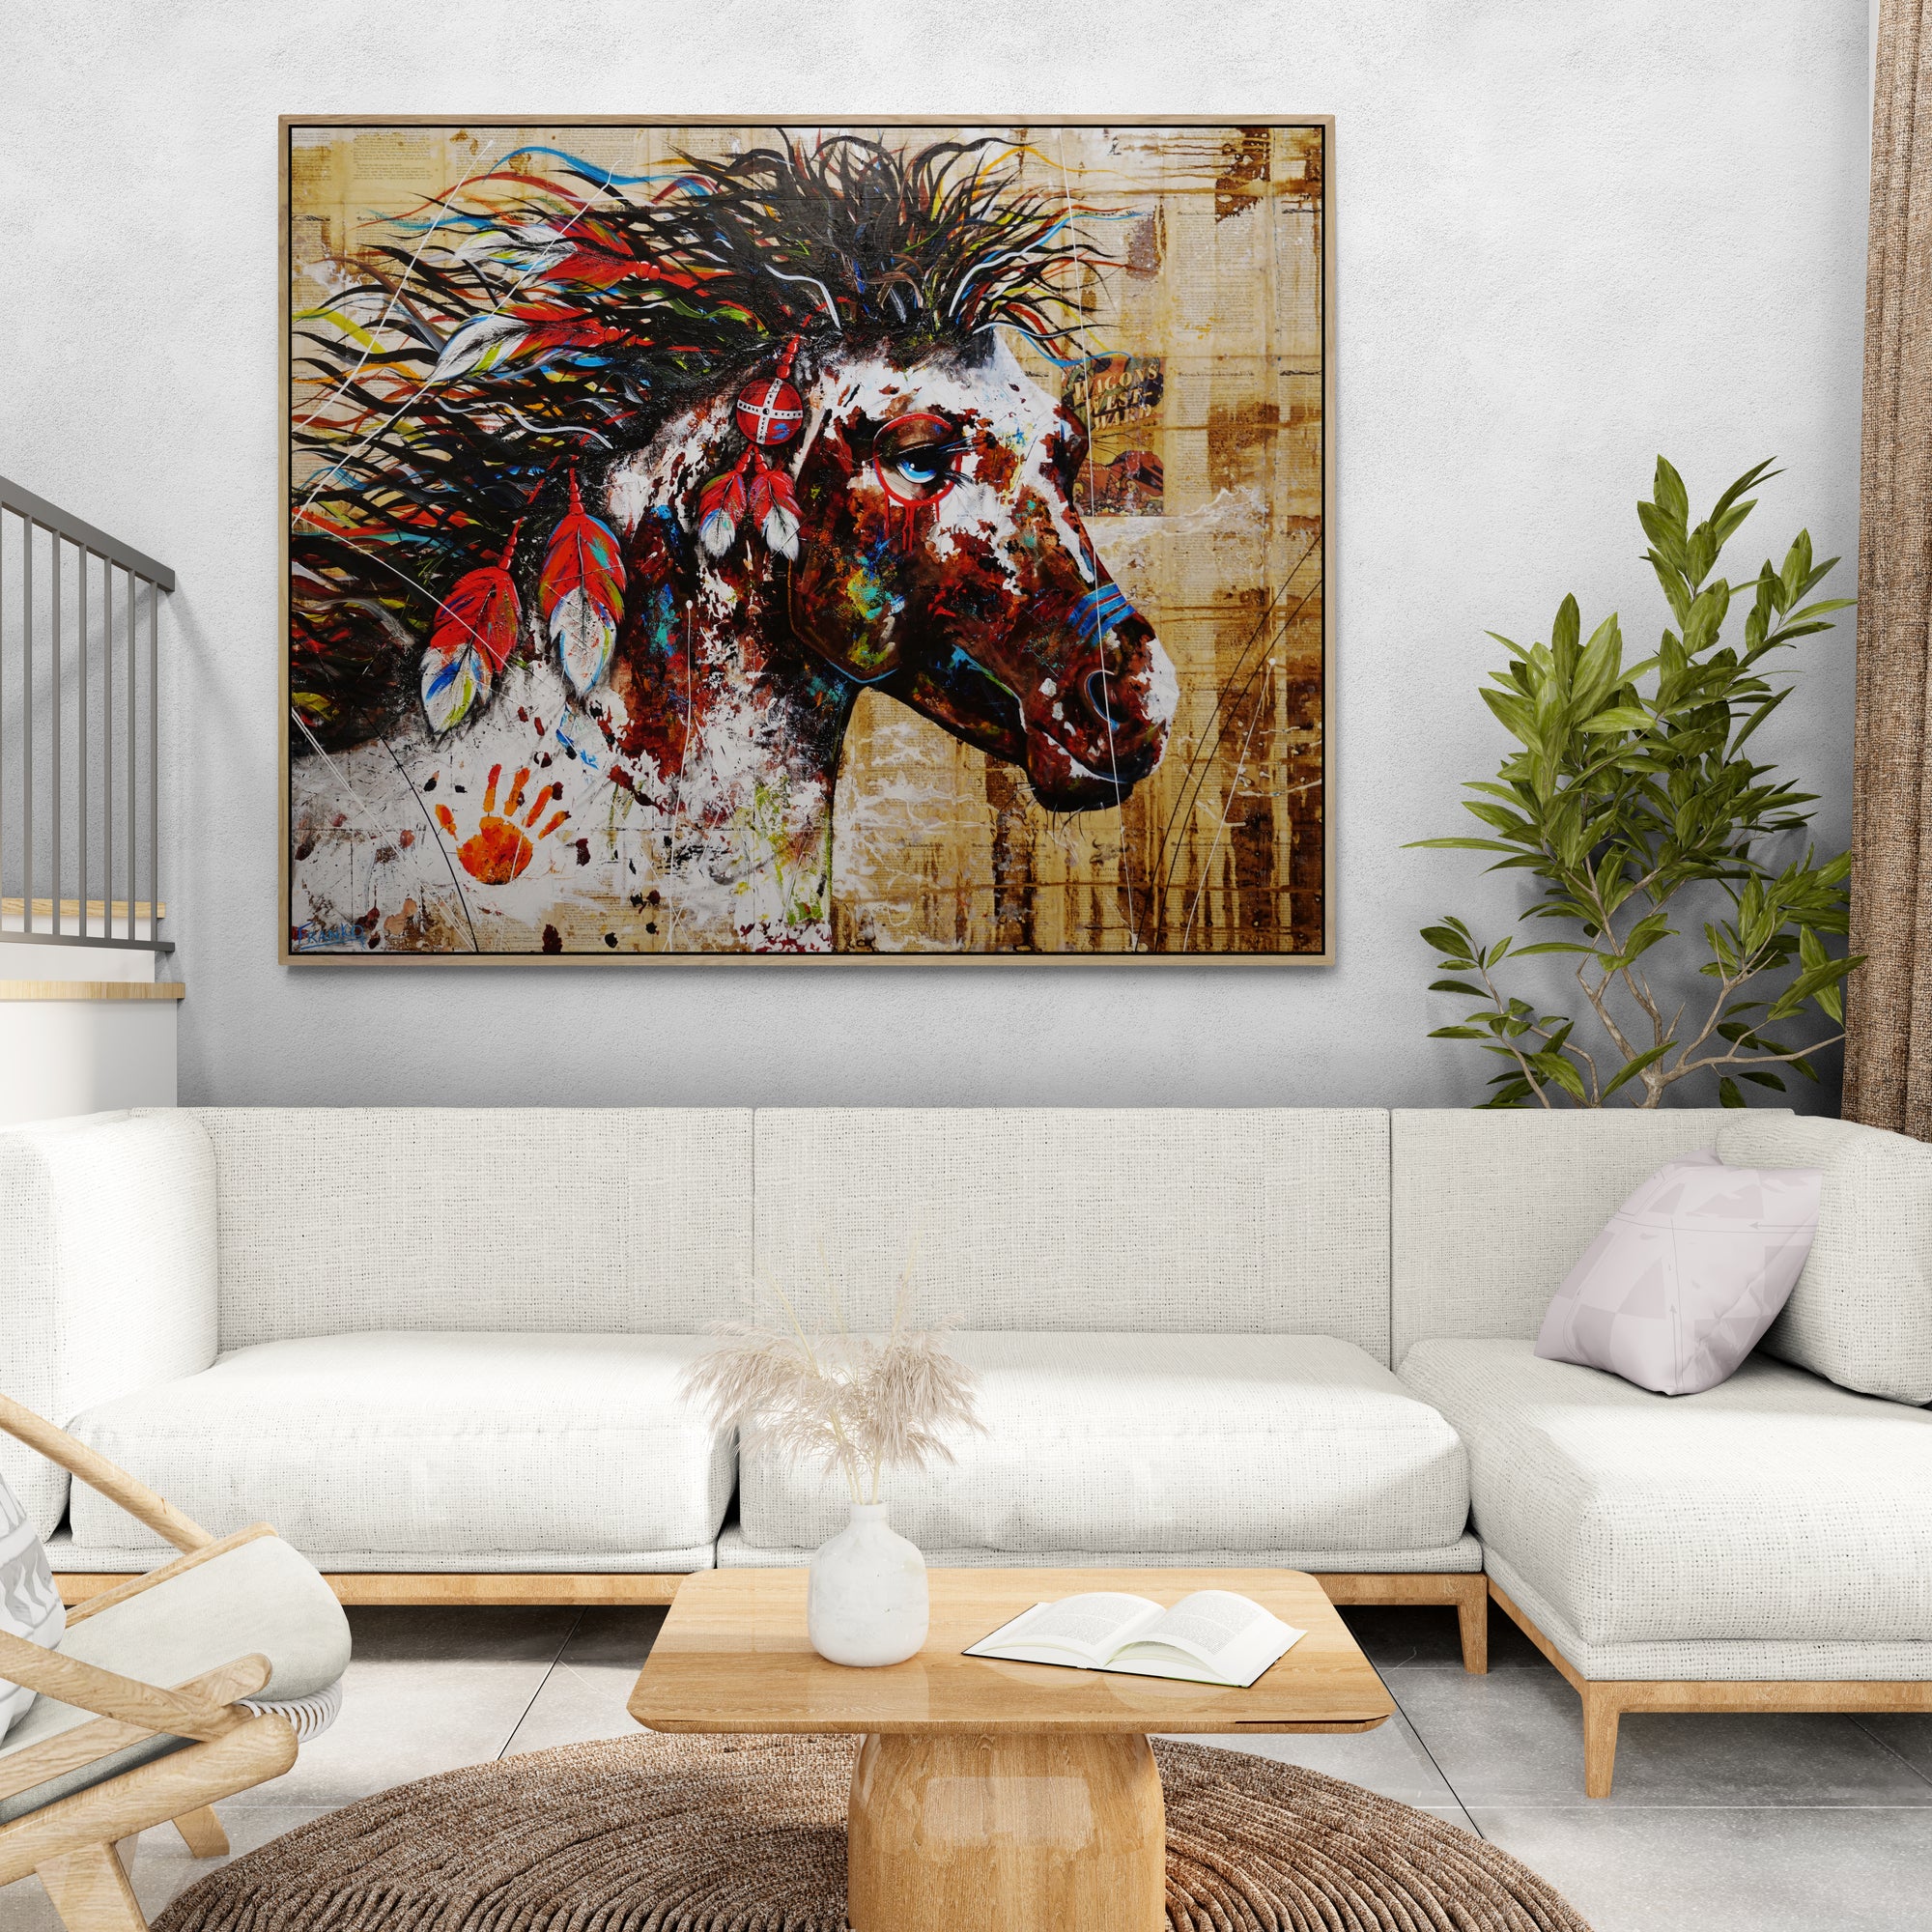 Wild Ahiga 120cm x 150cm Indian War Horse Abstract Realism Book Club Painting